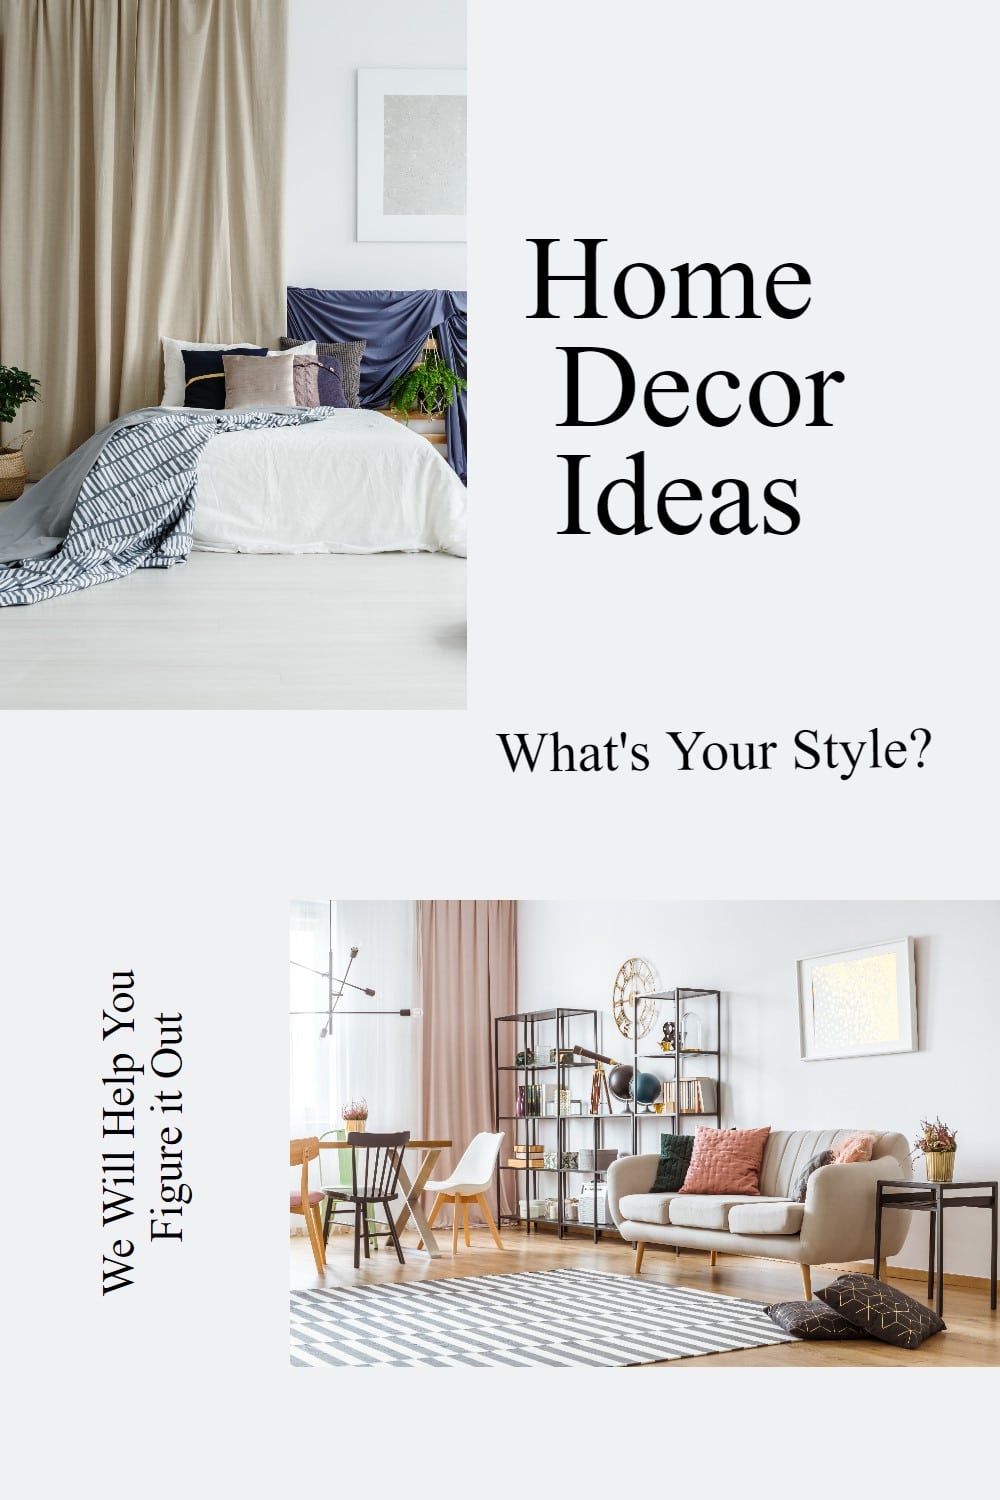 If you're looking for your home style, this article about home decor ideas will get you on the right track. Decorating tips and more. via @repurposedlife